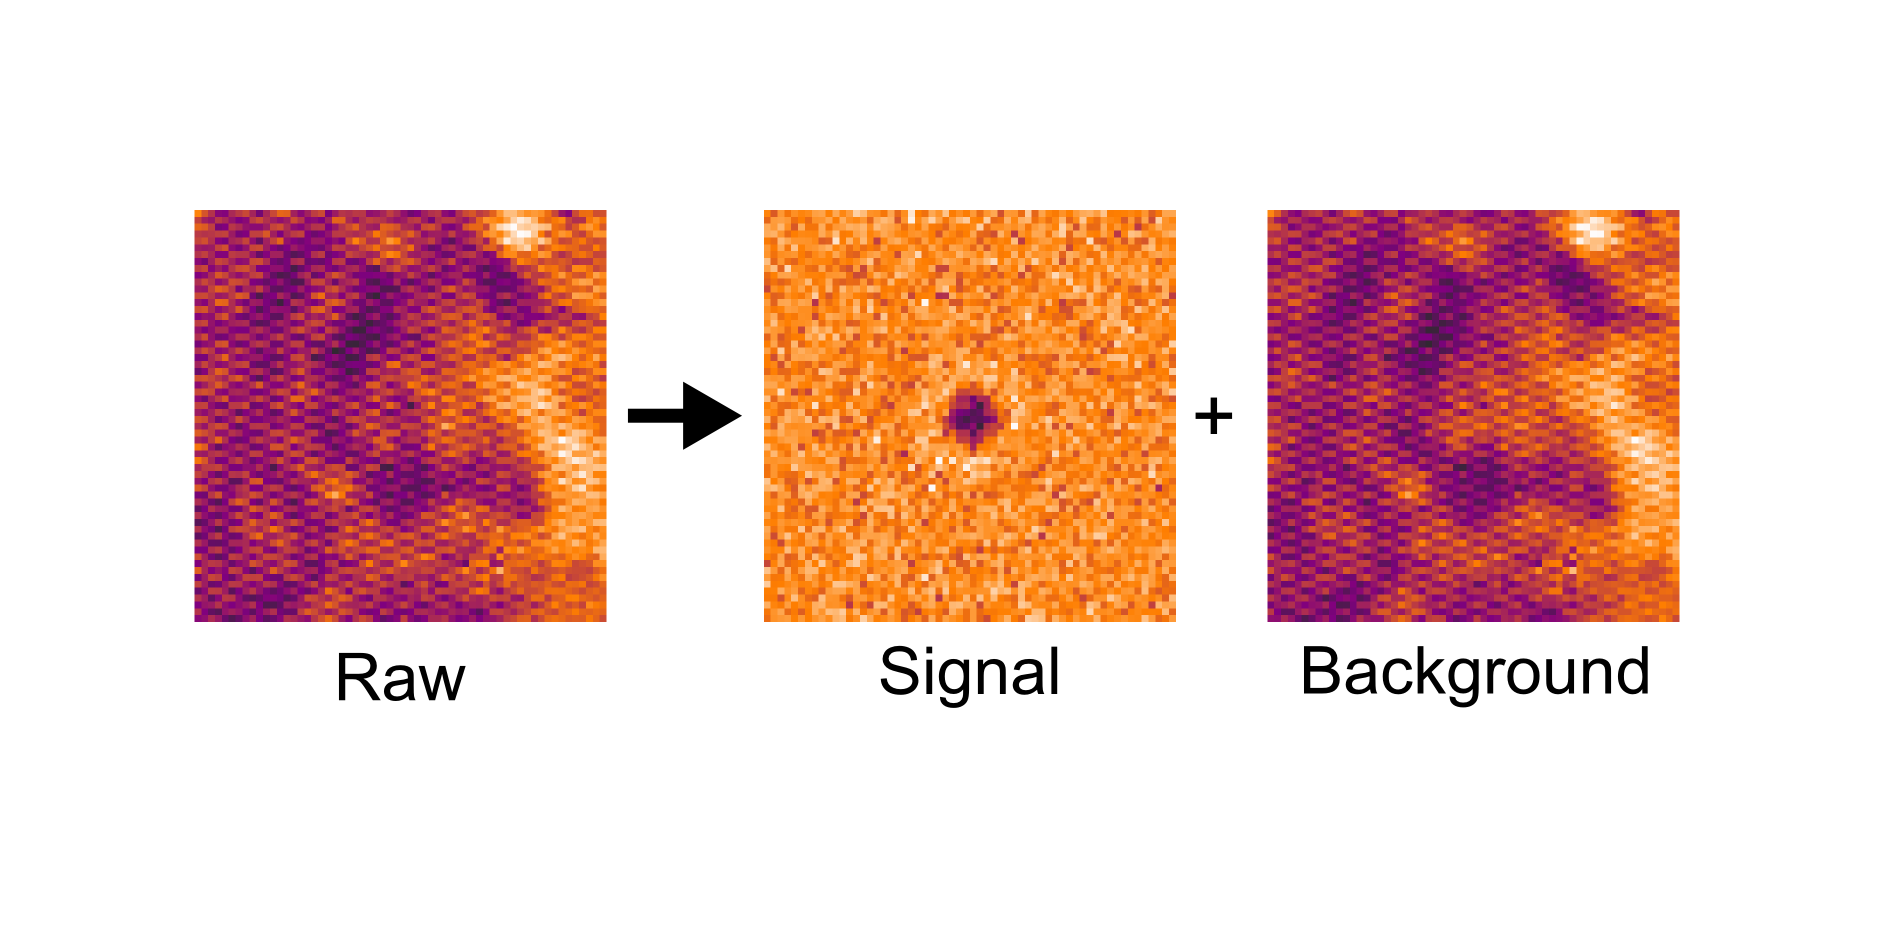 Background estimation and correction for high-precision localization microscopy